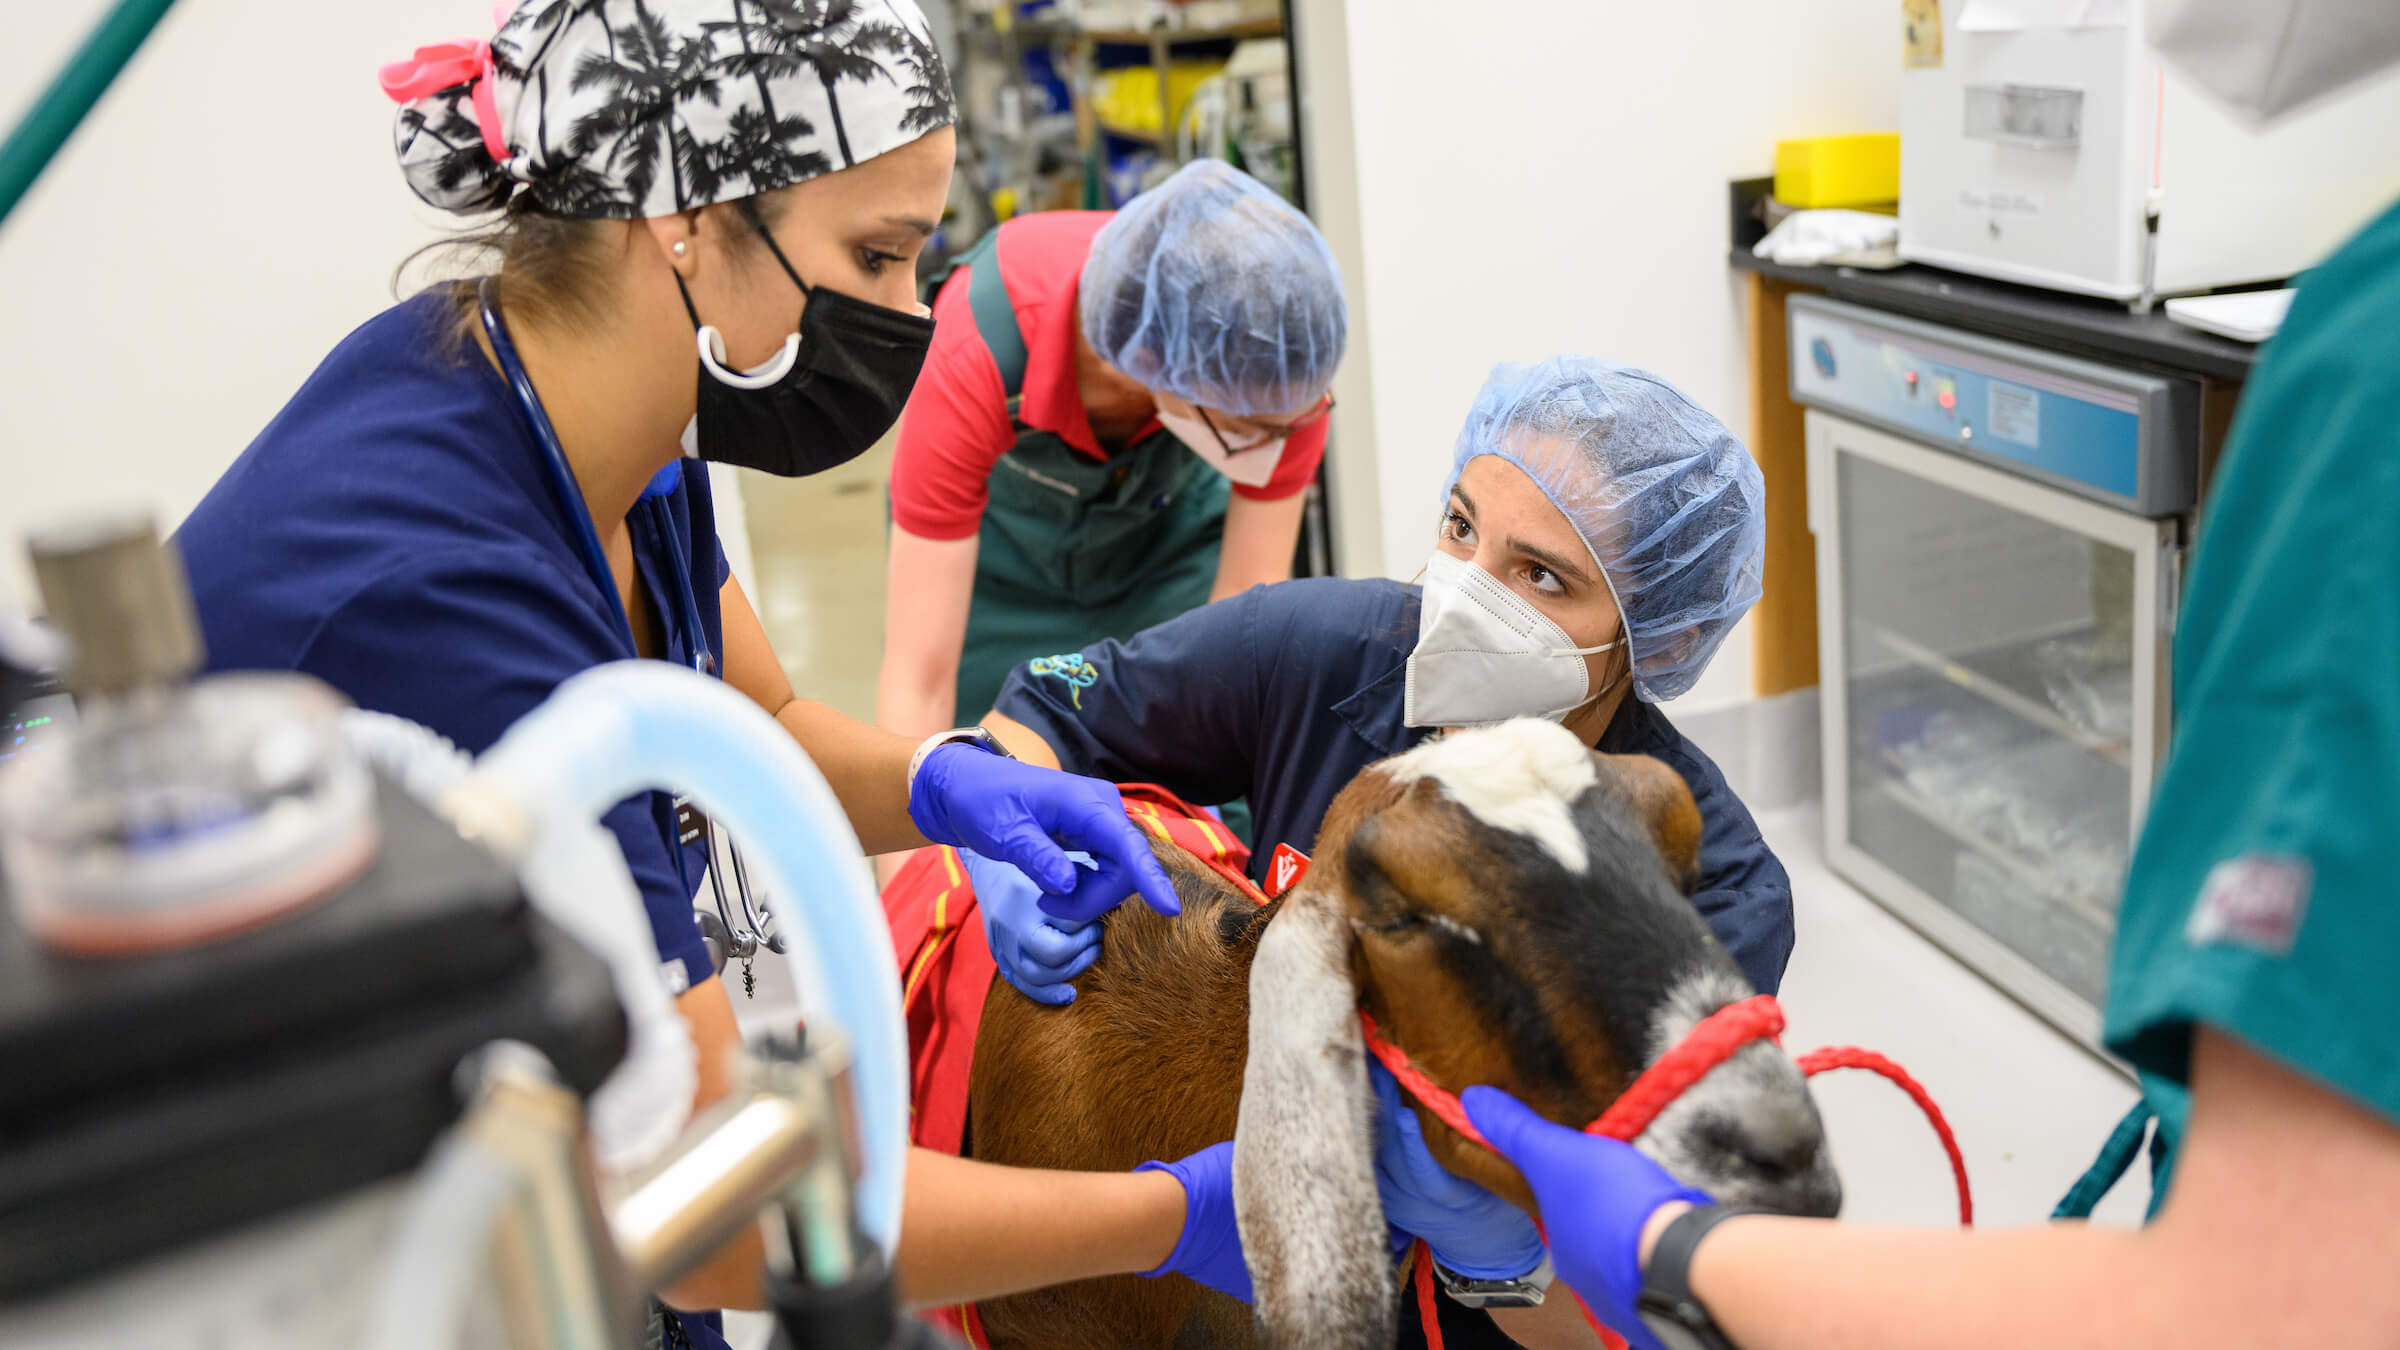 two women examine a goat in a clinical setting